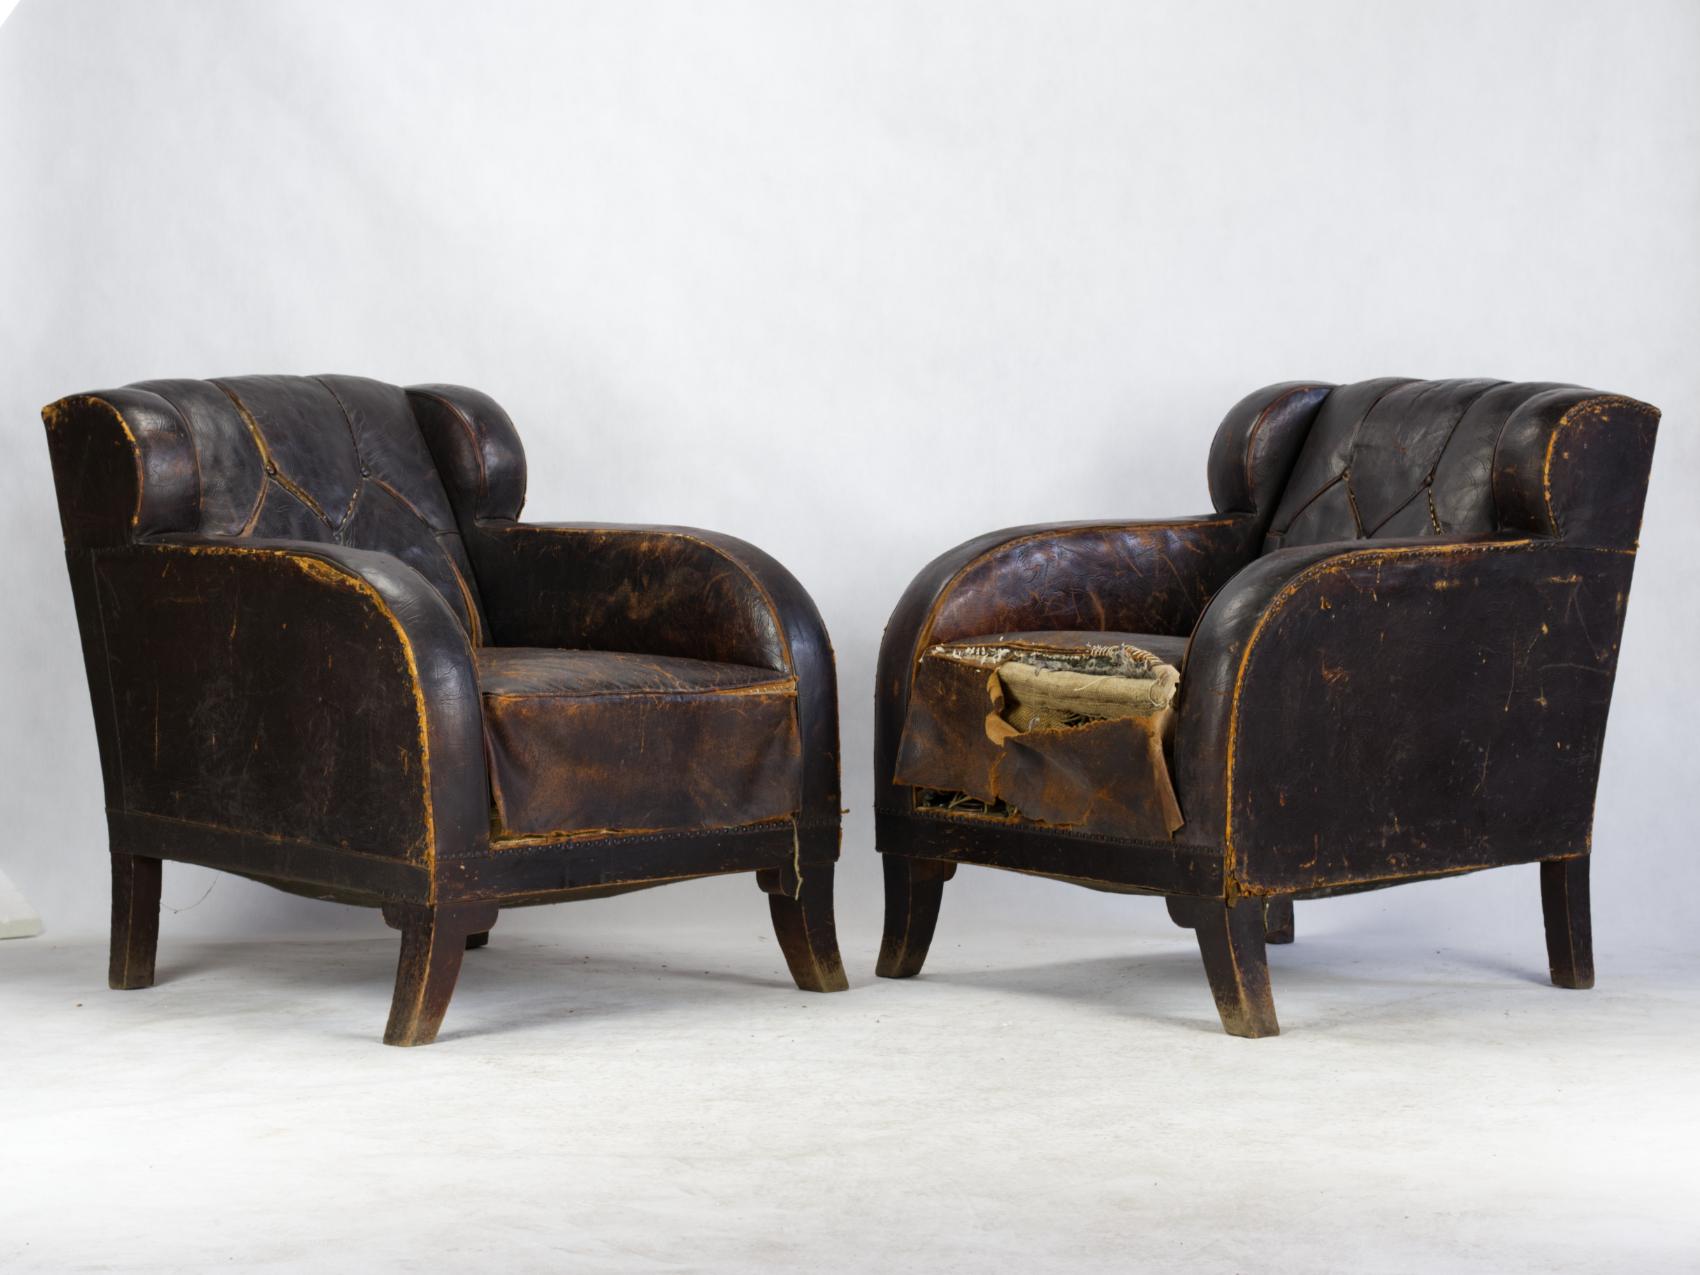 Pair of Art Nouveau Leather Club Chairs, circa 1920 For Sale 3